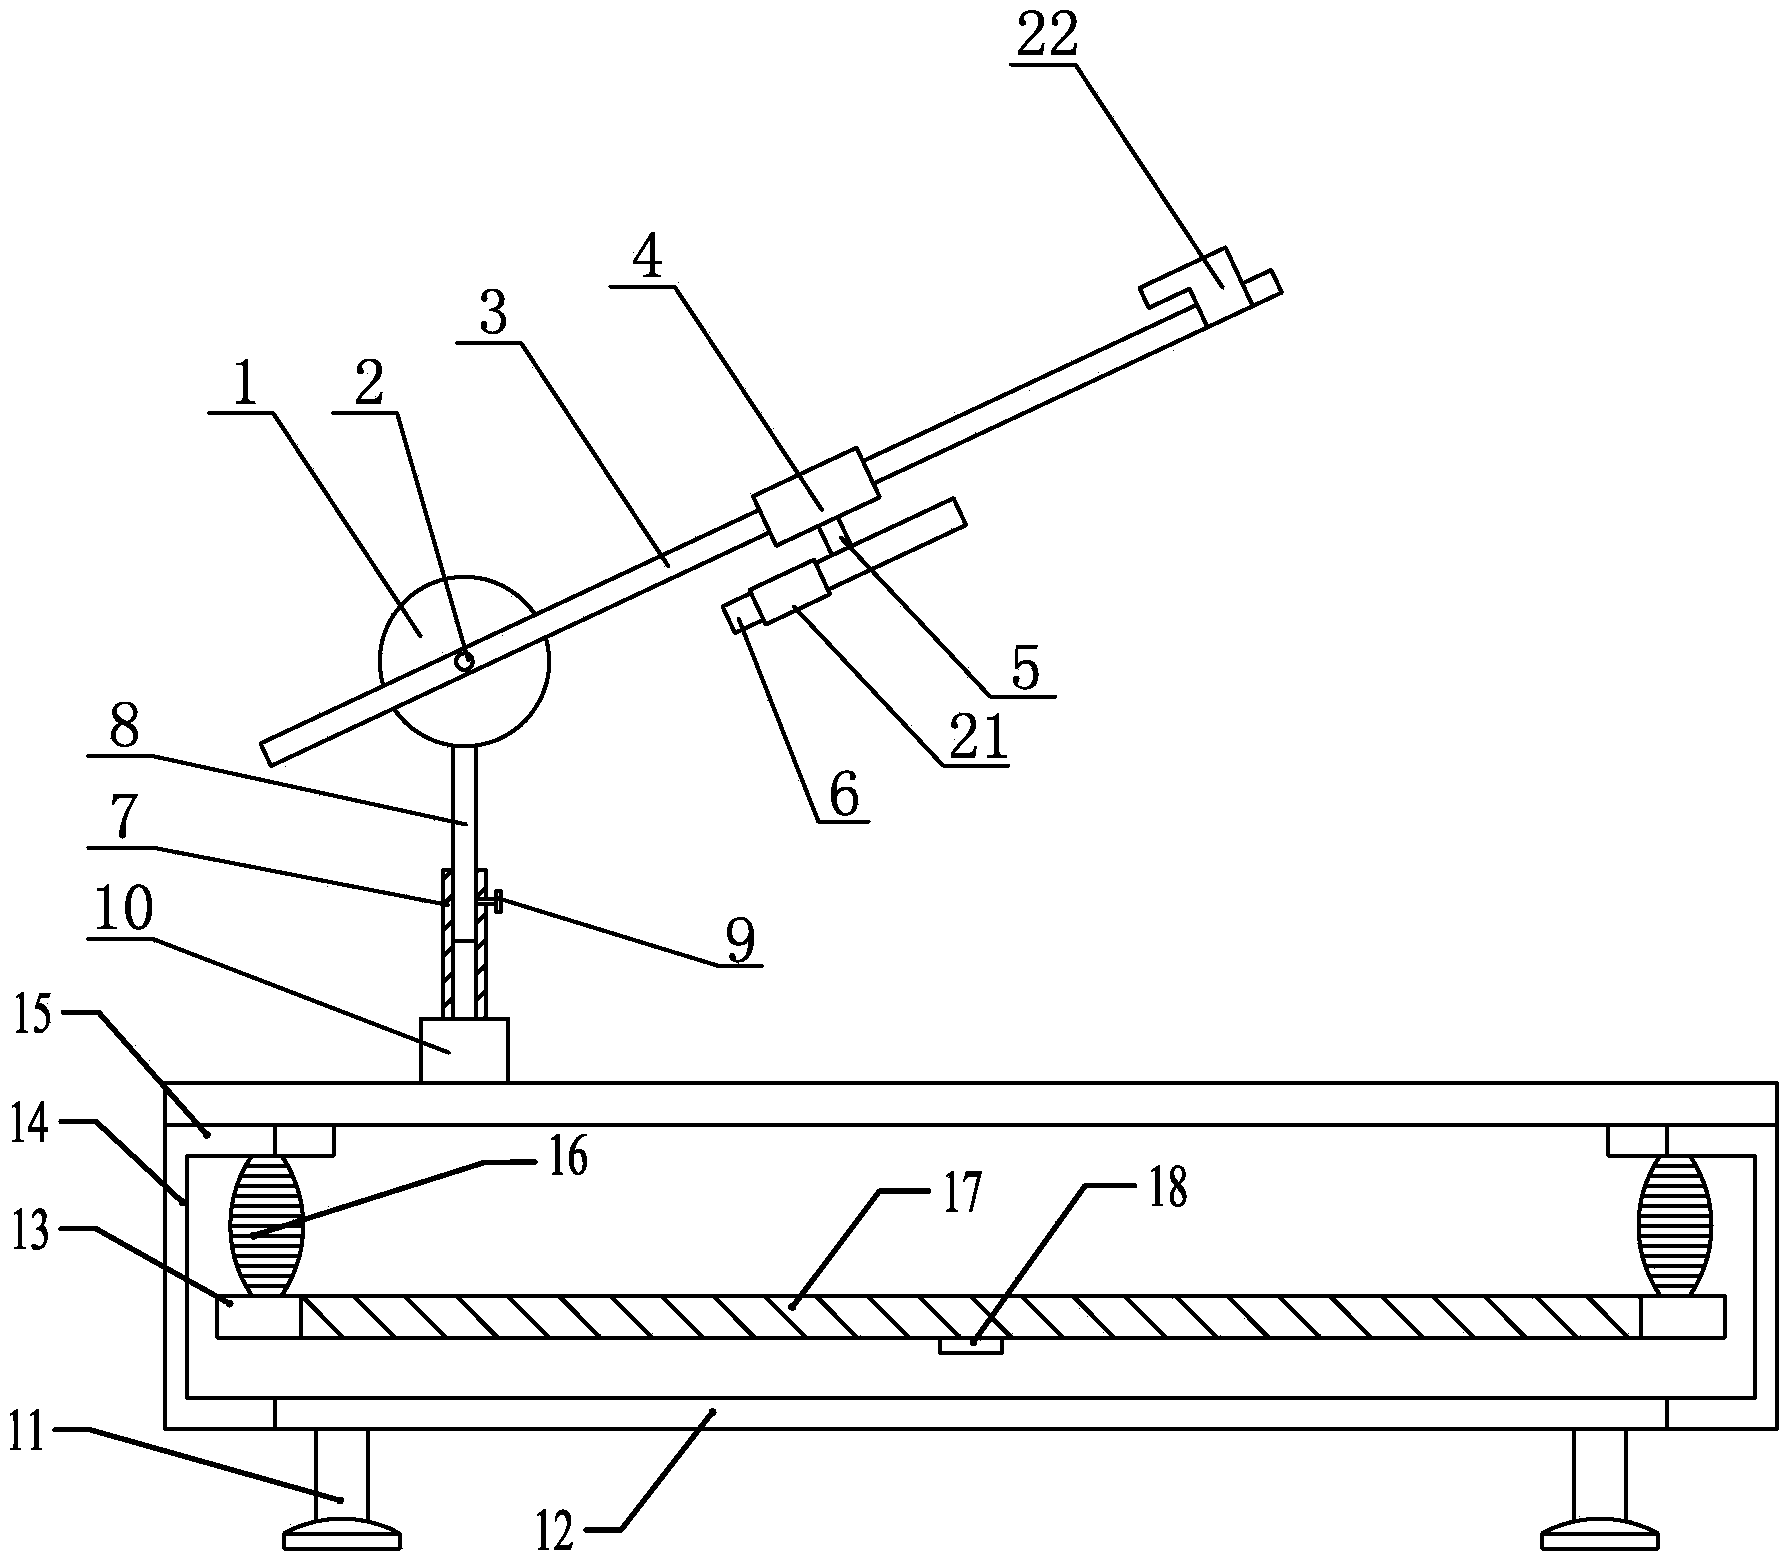 Laser type javelin core stability and strength training and information feedback monitoring device